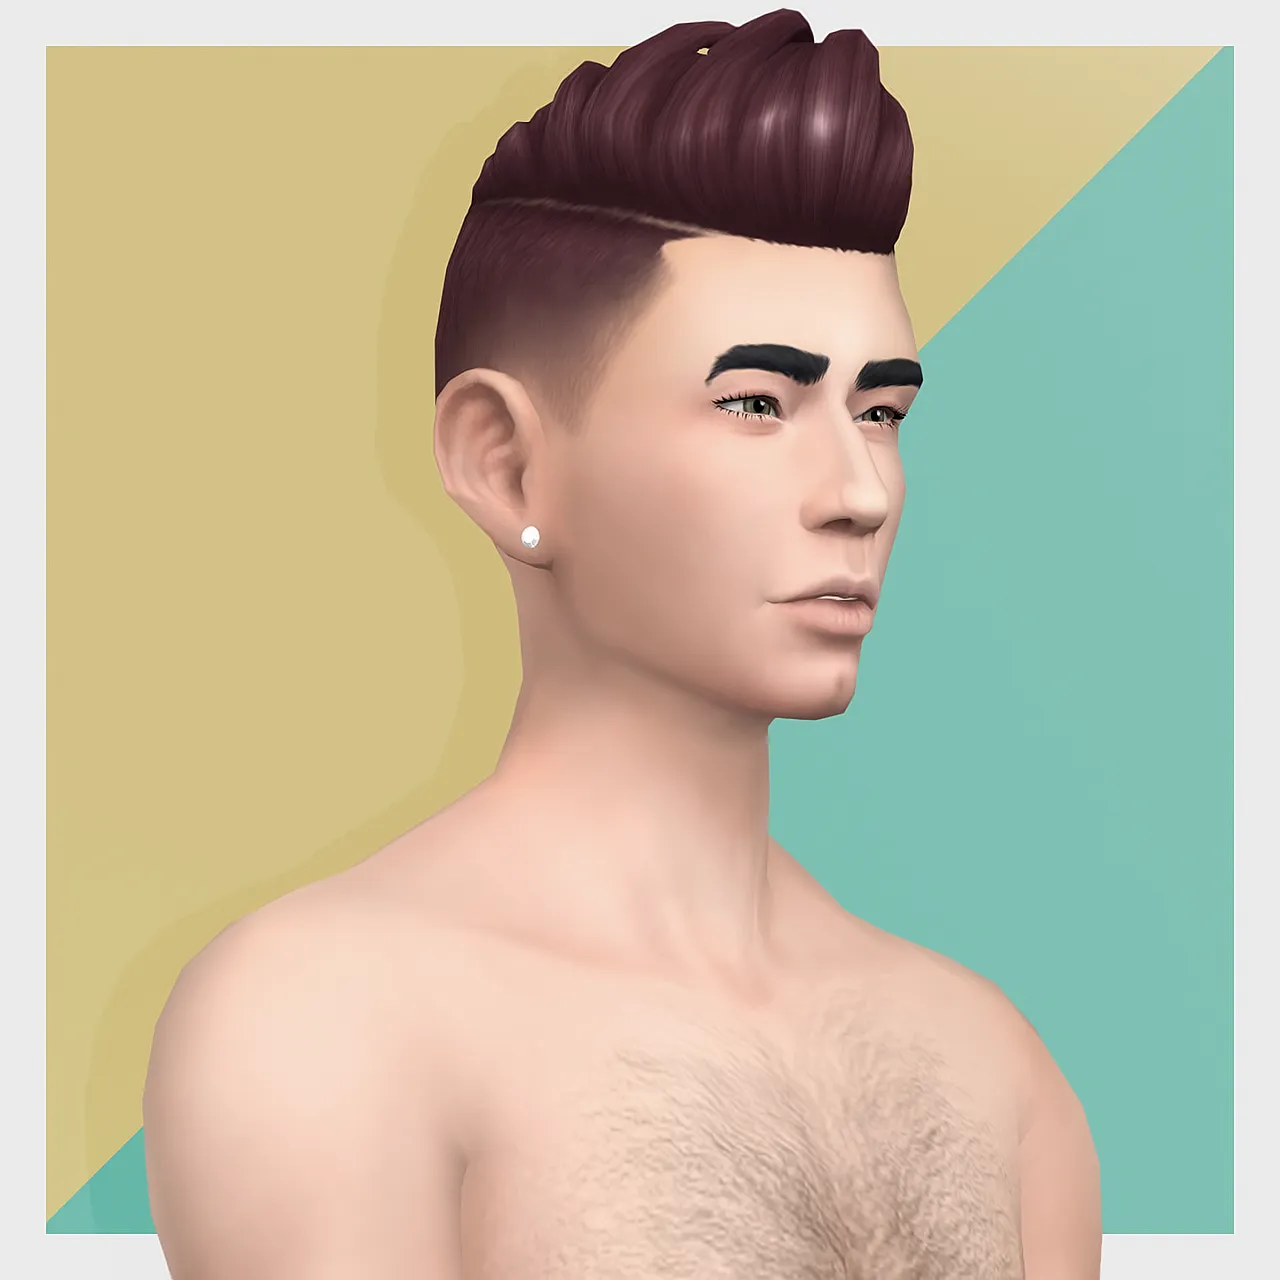 SP10 Male & Female Hairs ReTextured/Recolored